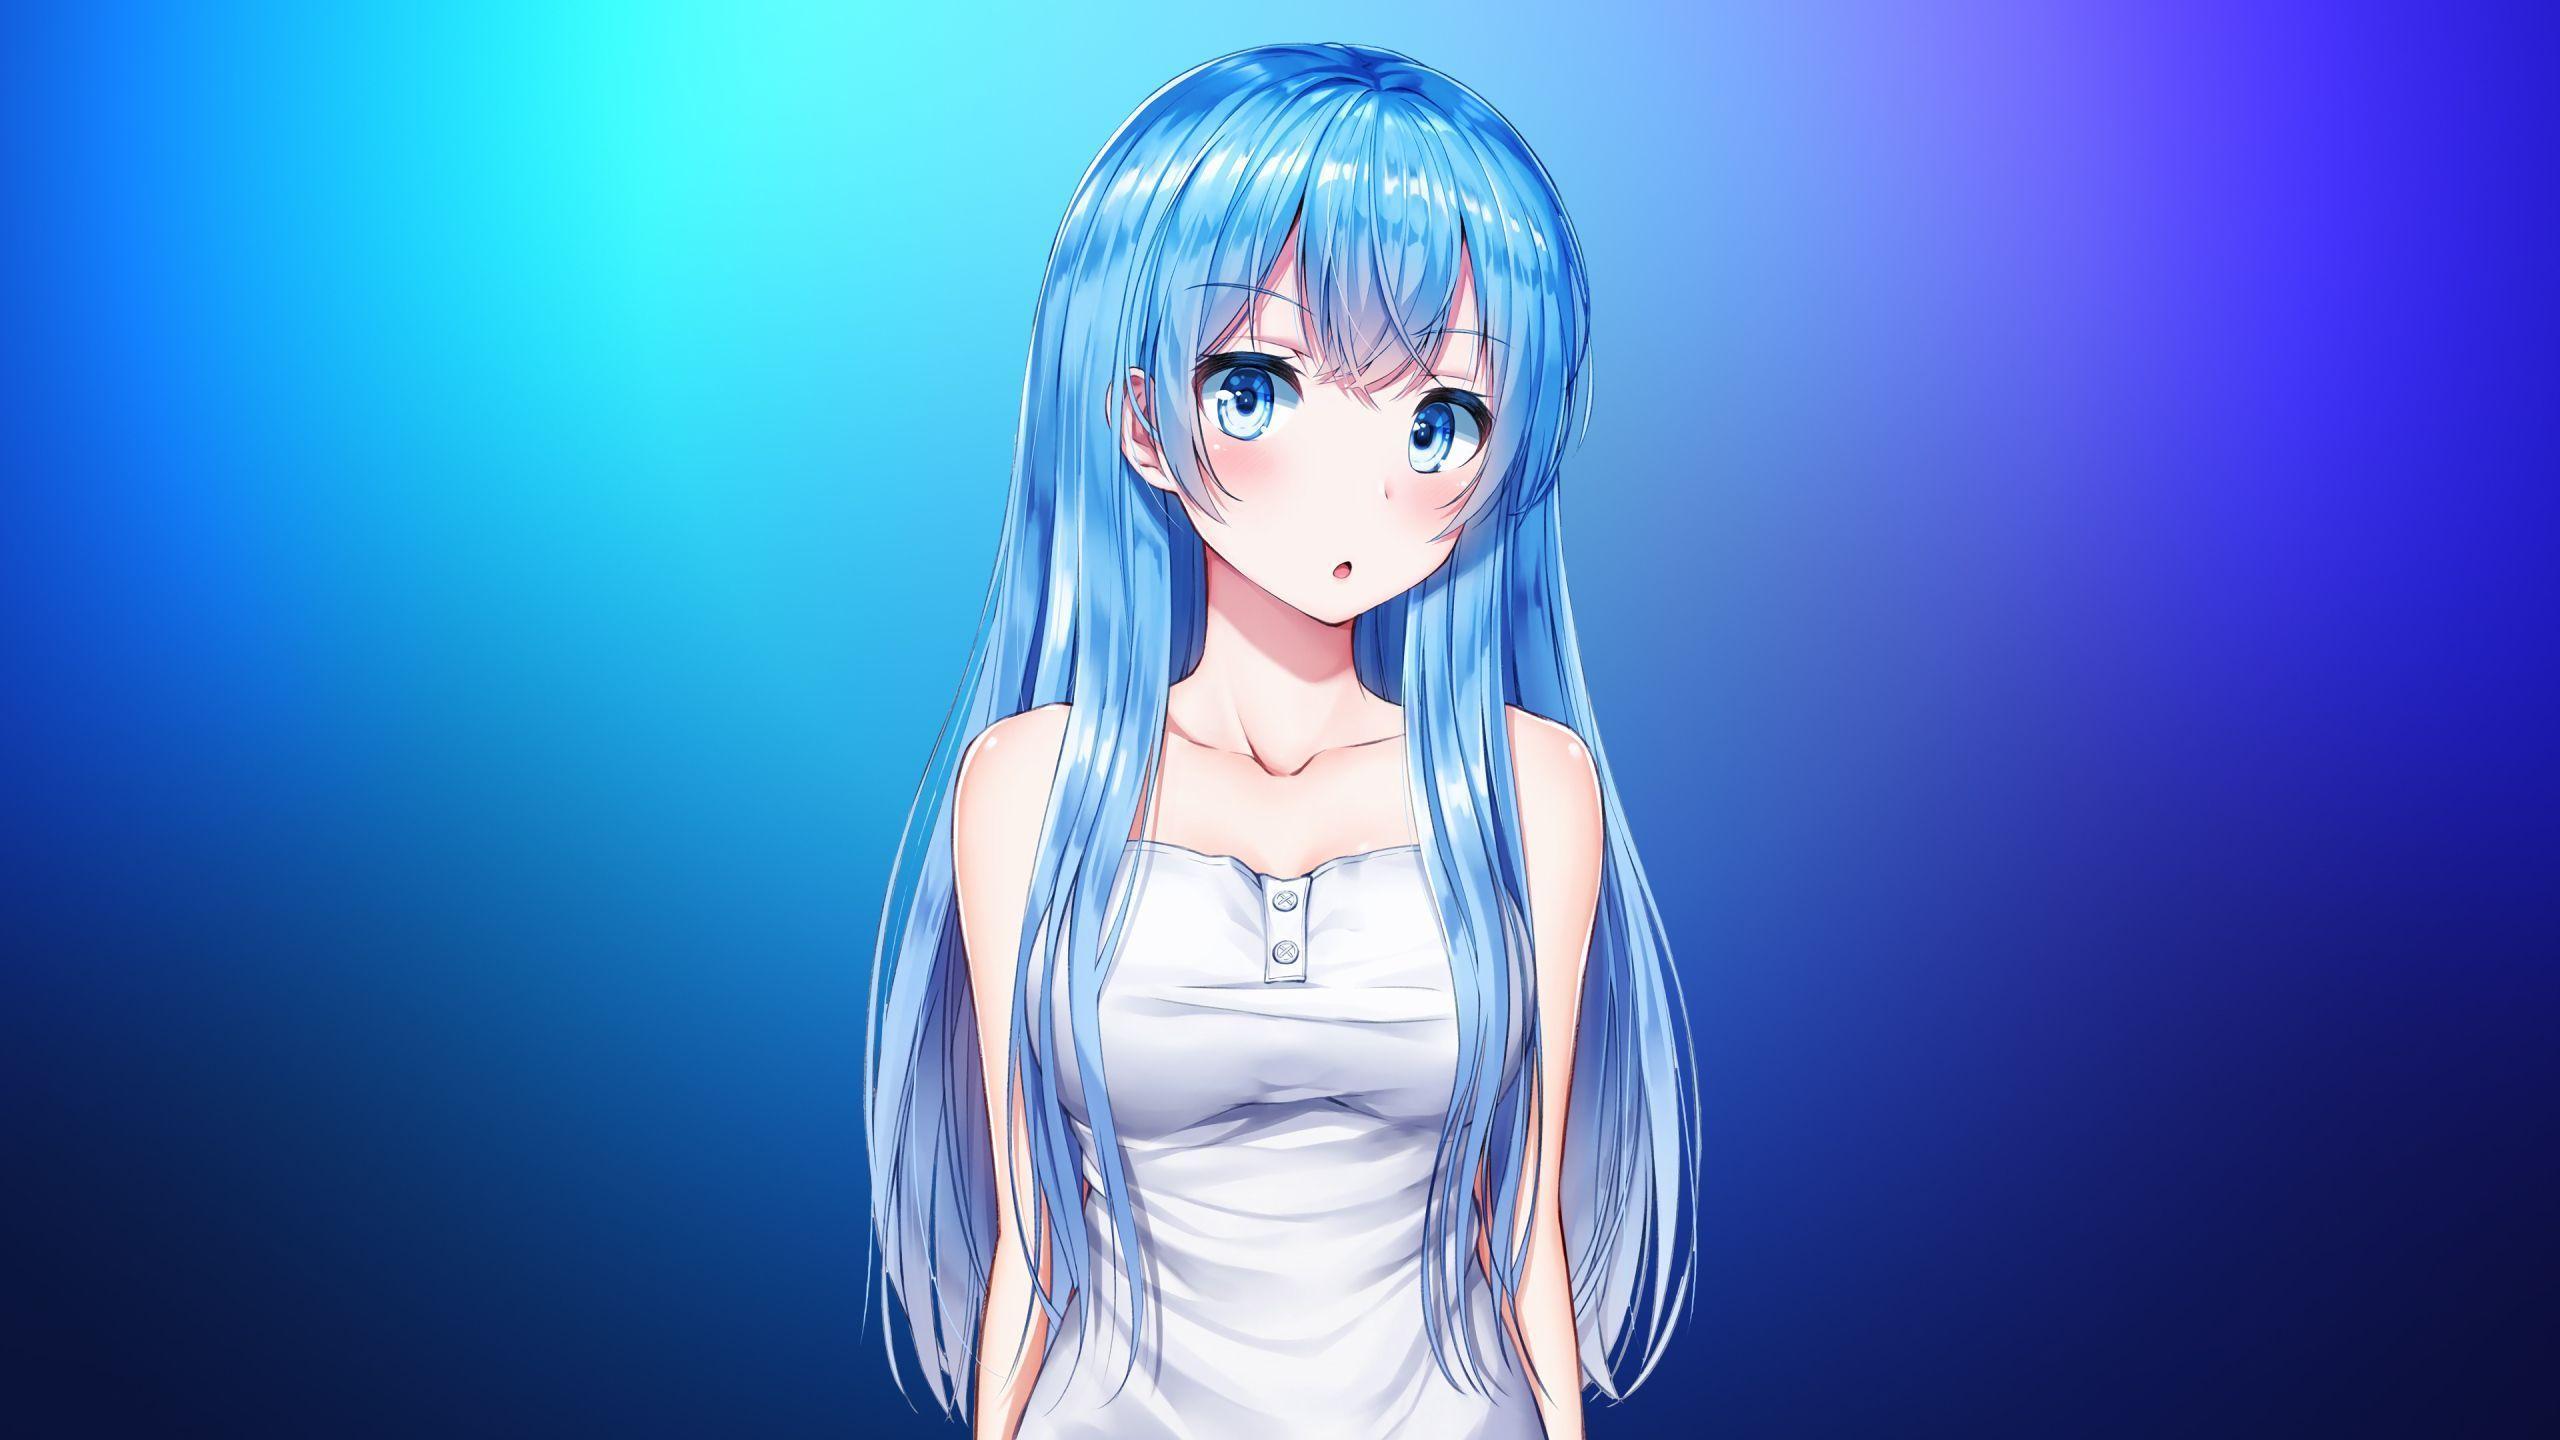 Hd Wallpaper Of Hd Wallpaper Anime With Blue Hair And Blue Eye Background,  3d Illustration Discount Template, Hd Photography Photo Background Image  And Wallpaper for Free Download